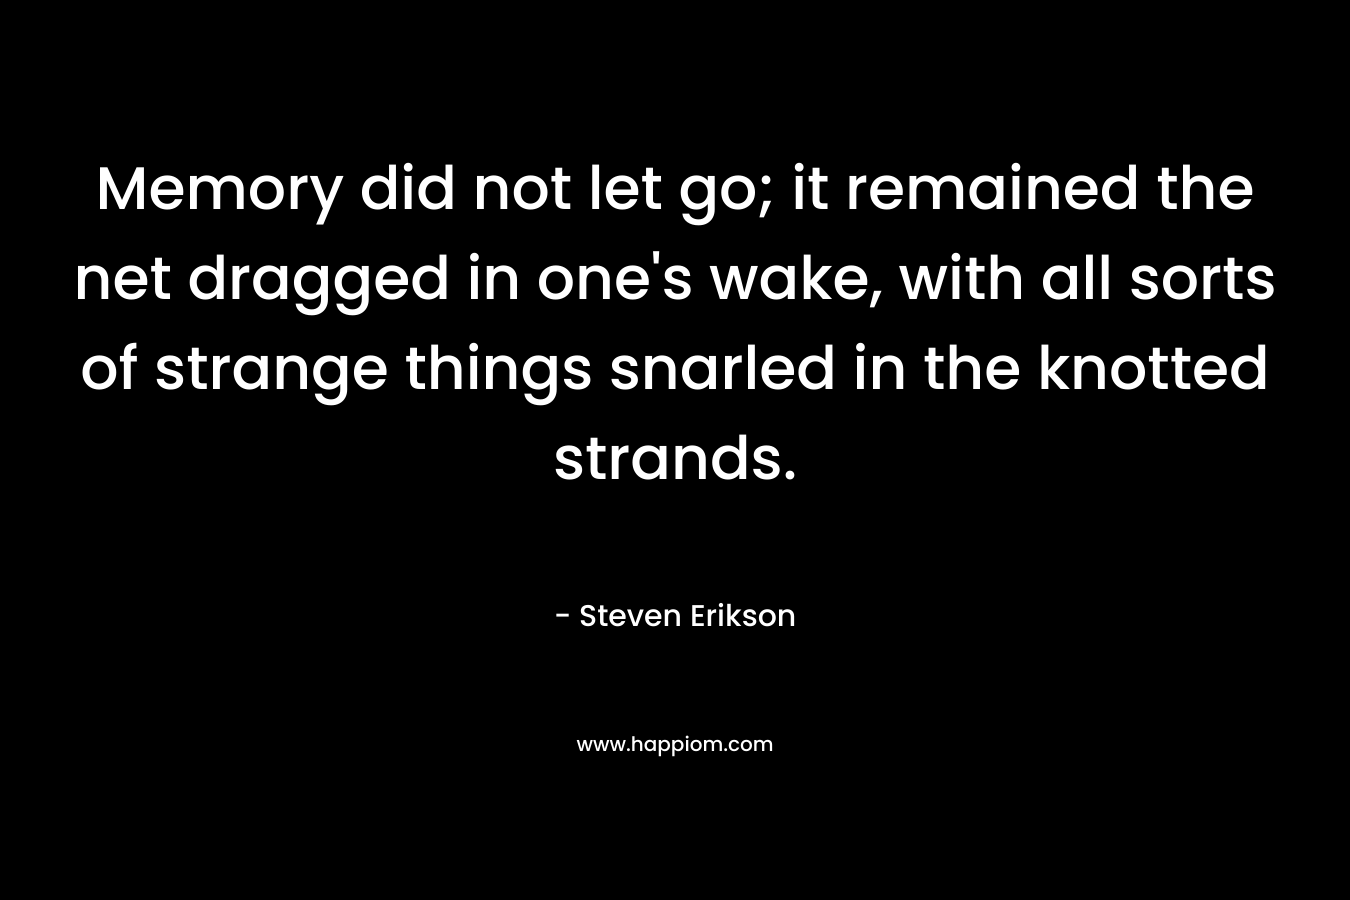 Memory did not let go; it remained the net dragged in one’s wake, with all sorts of strange things snarled in the knotted strands. – Steven Erikson